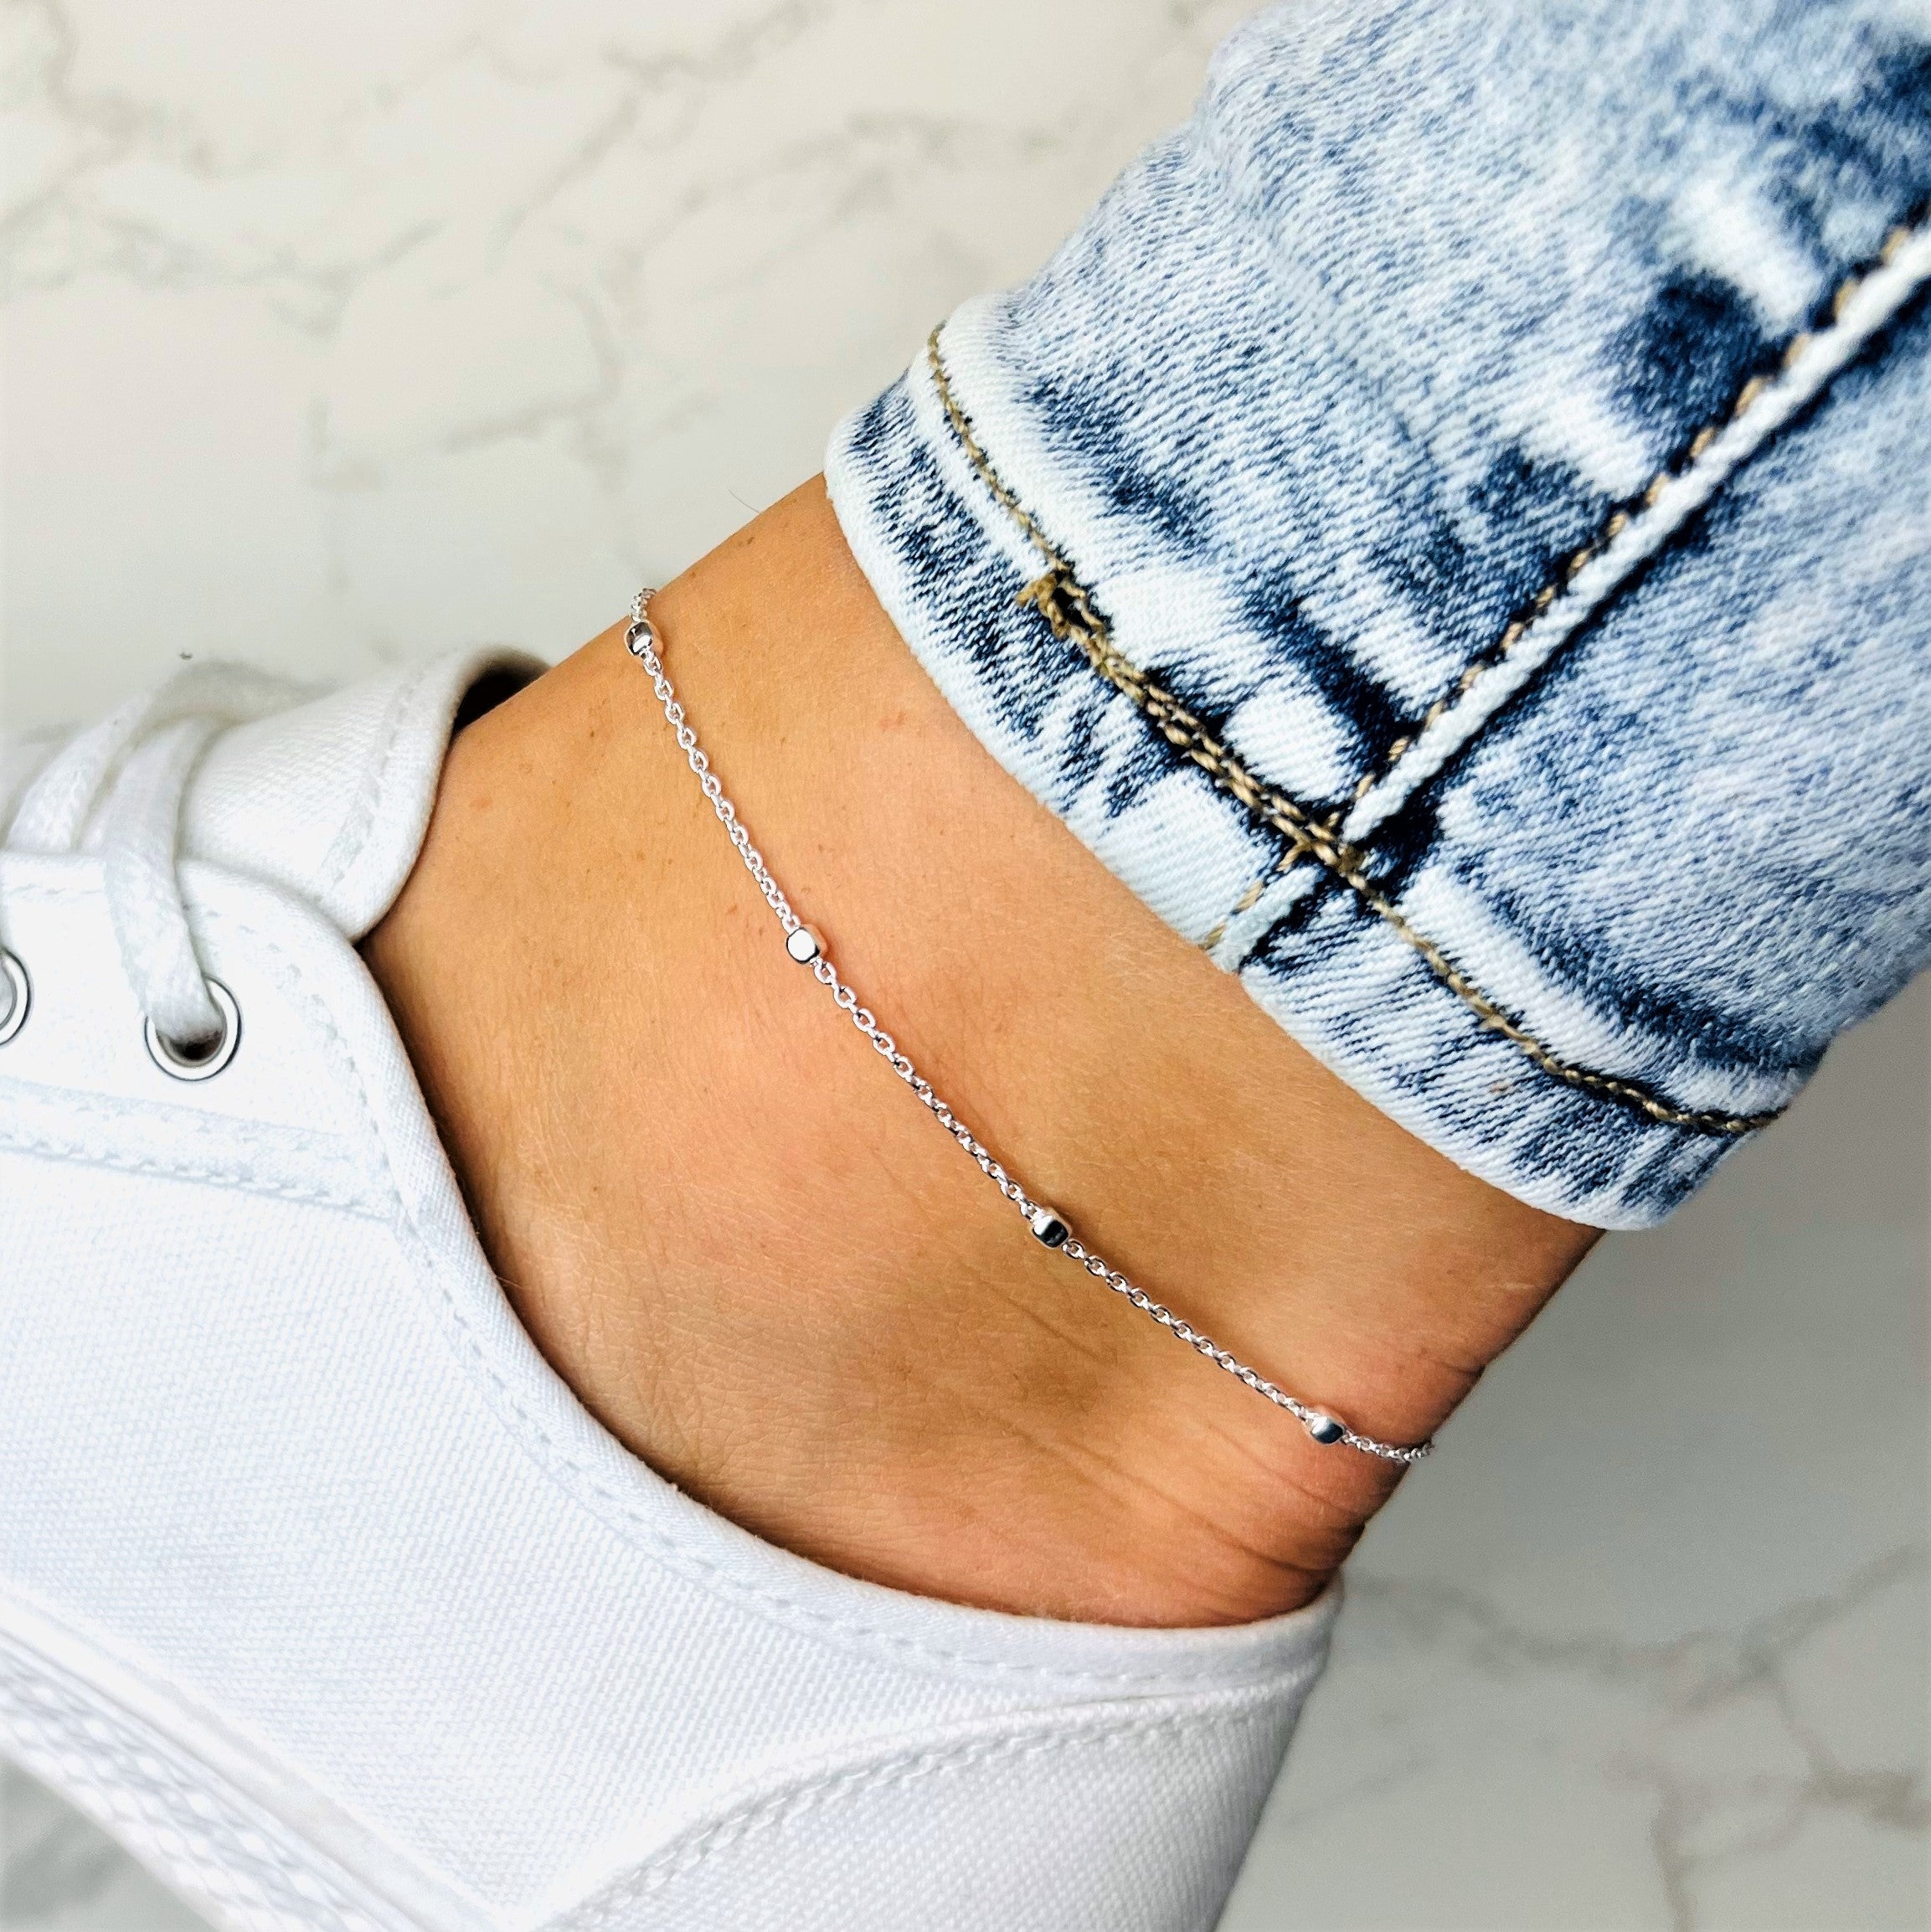 925 Sterling Silver Anti-Tarnish Plated Plain Anklet Bracelet Silver Square Cube Beads with extender - GA-ANK6